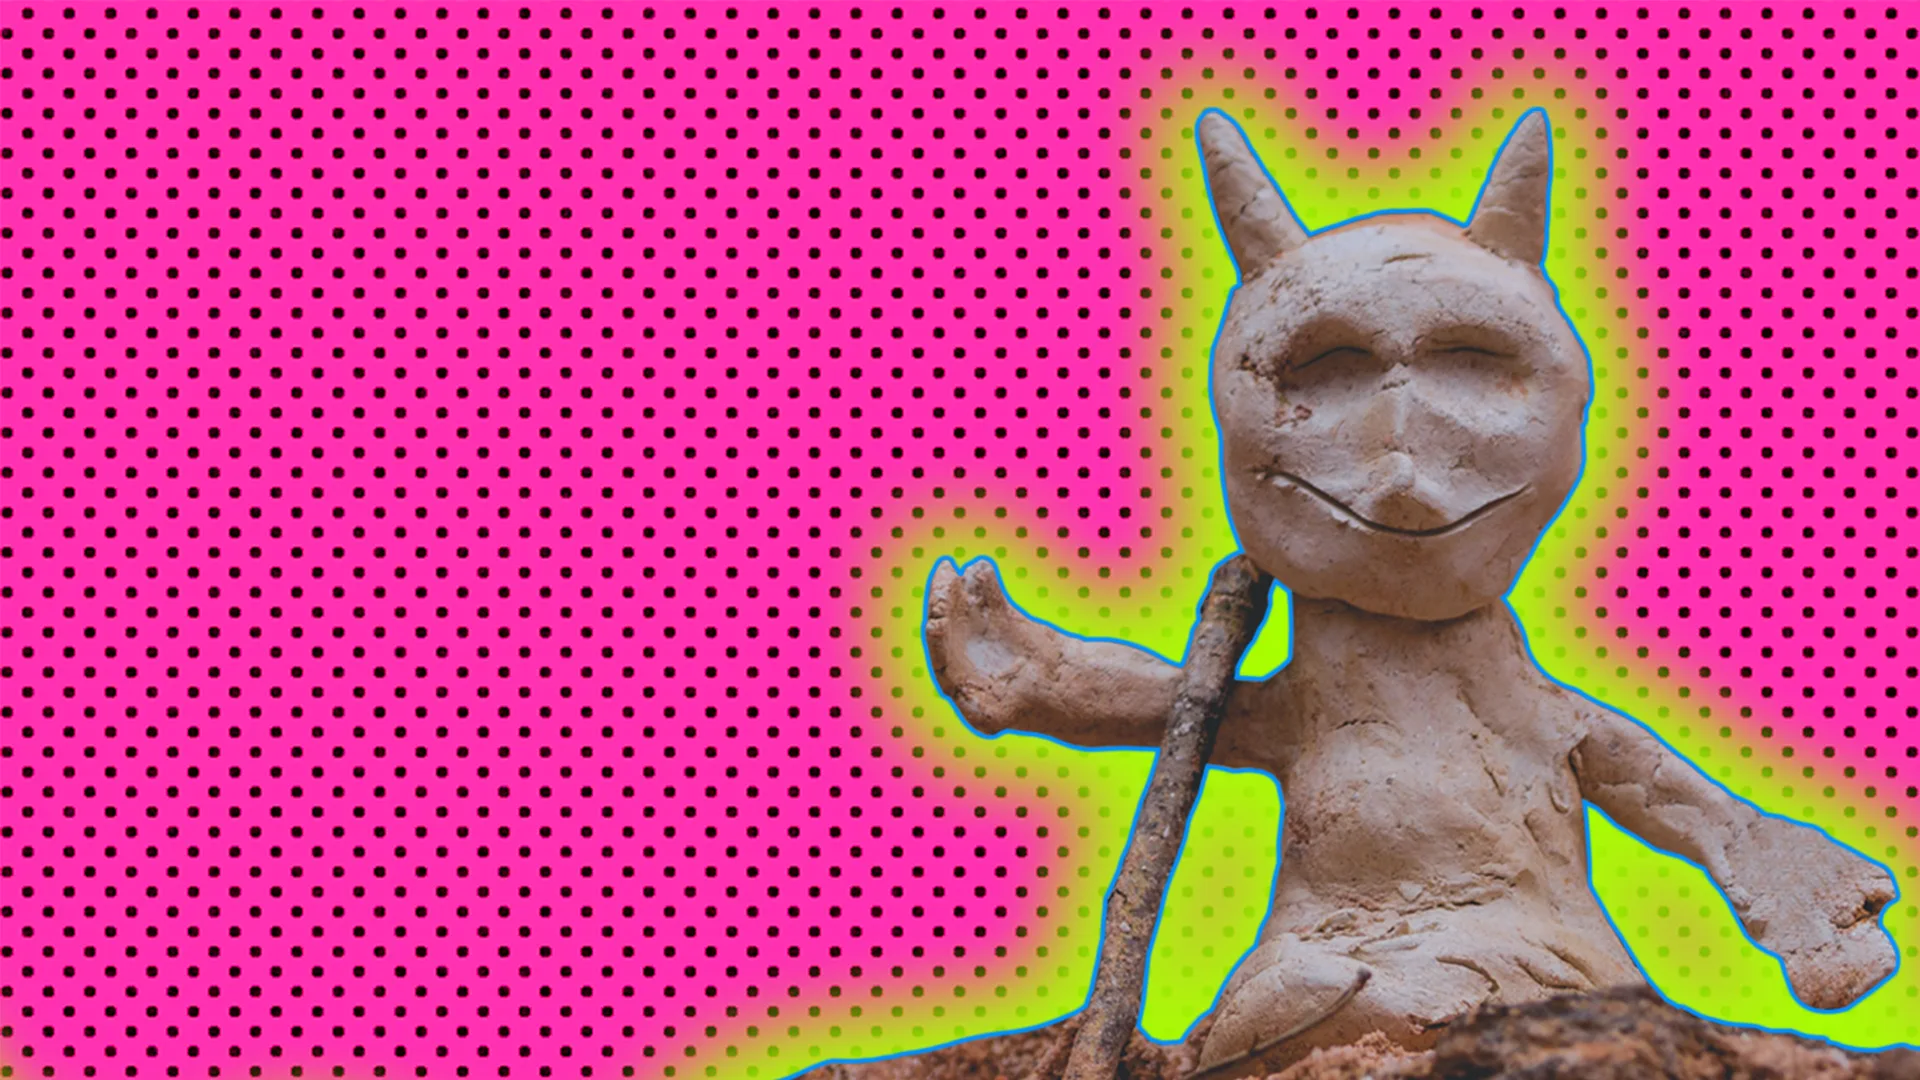 Clay monster with a polkadot background and a glow around the image